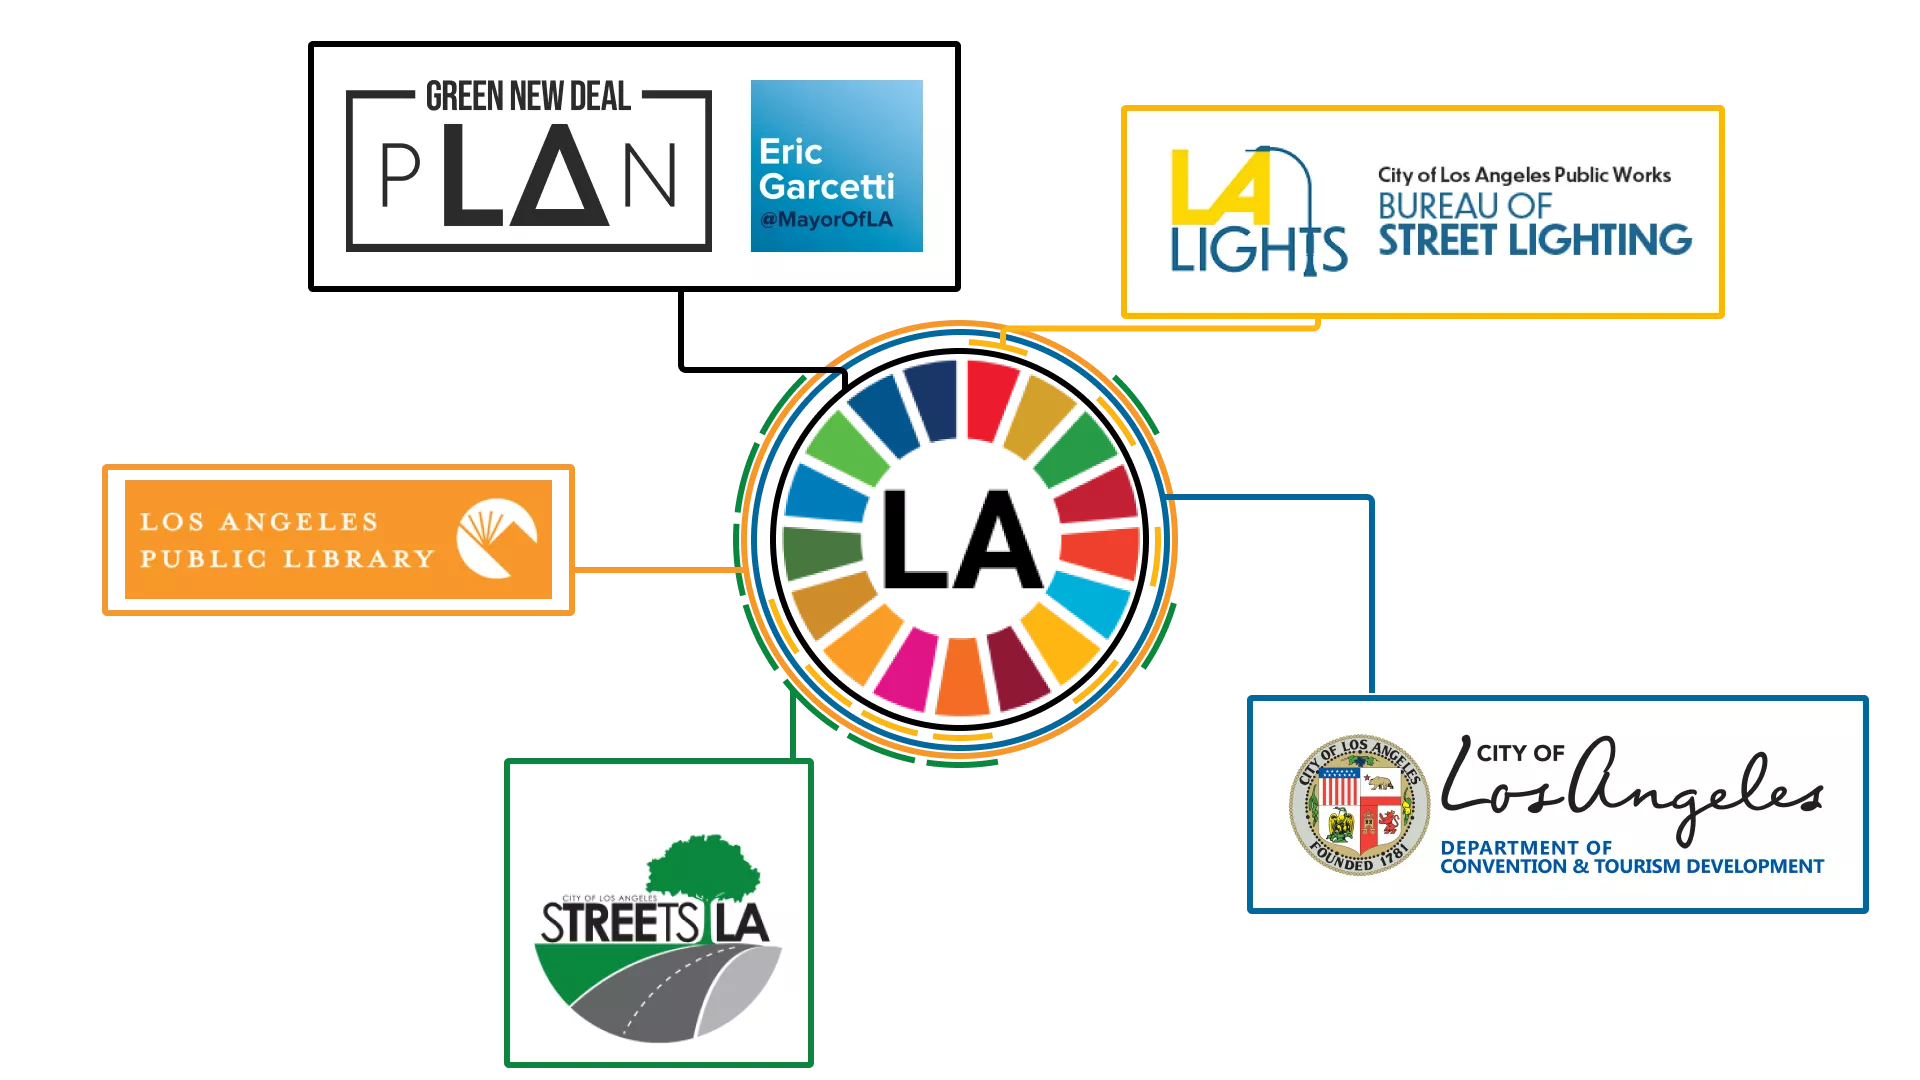 Image shows SDG wheel in the middle surrounded by logos for the LA Green New Deal, the Bureau of Street Lighting, the Los Angeles Public Library, the Los Angeles Tourism Department, and StreetsLA